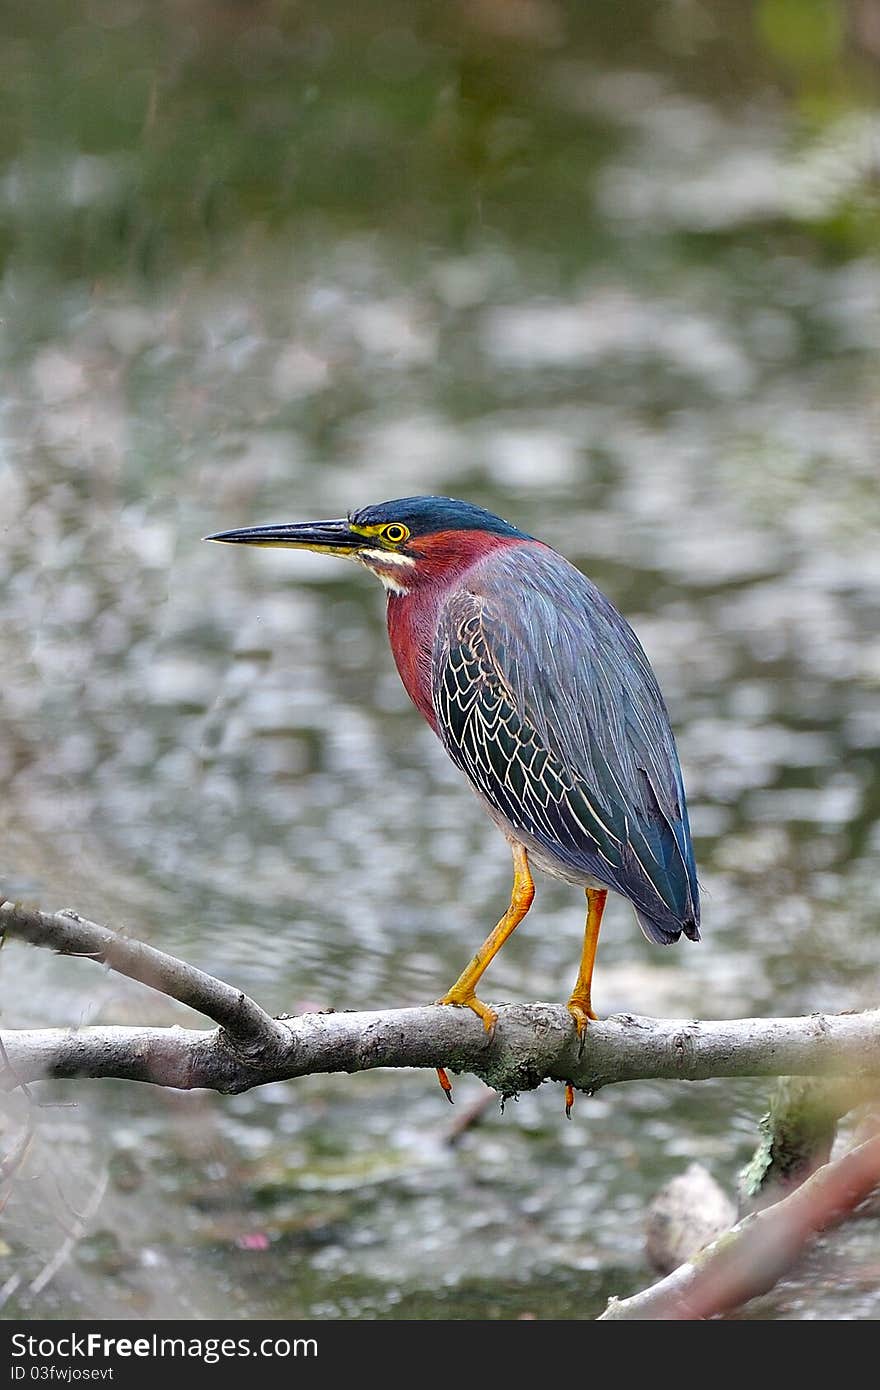 Green Heron standing on branch over pond.